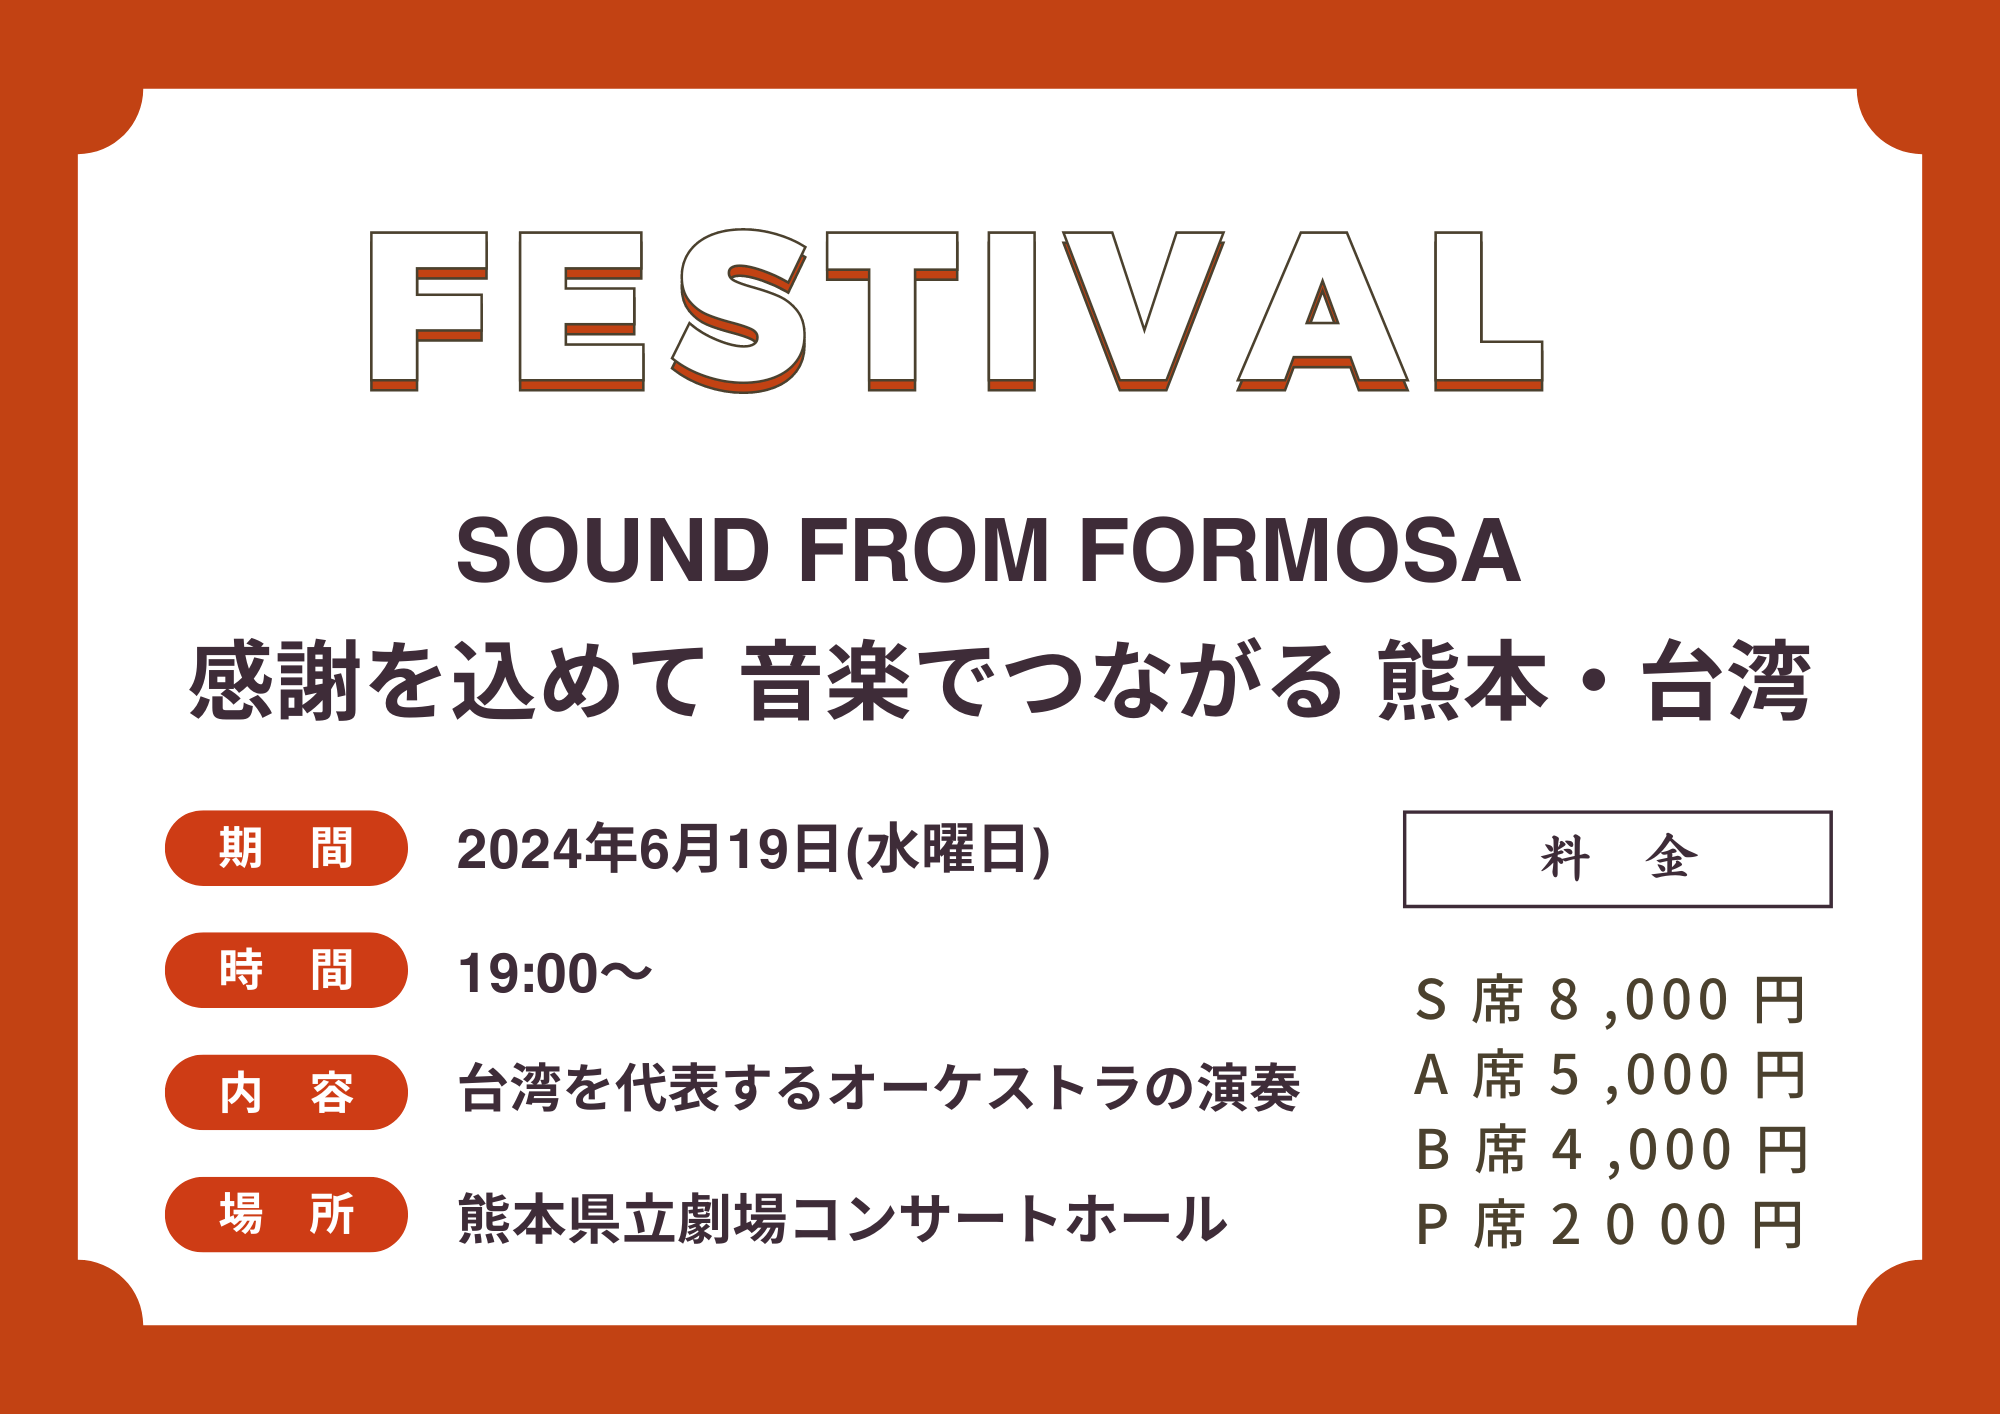 SOUND FROM FORMOSA